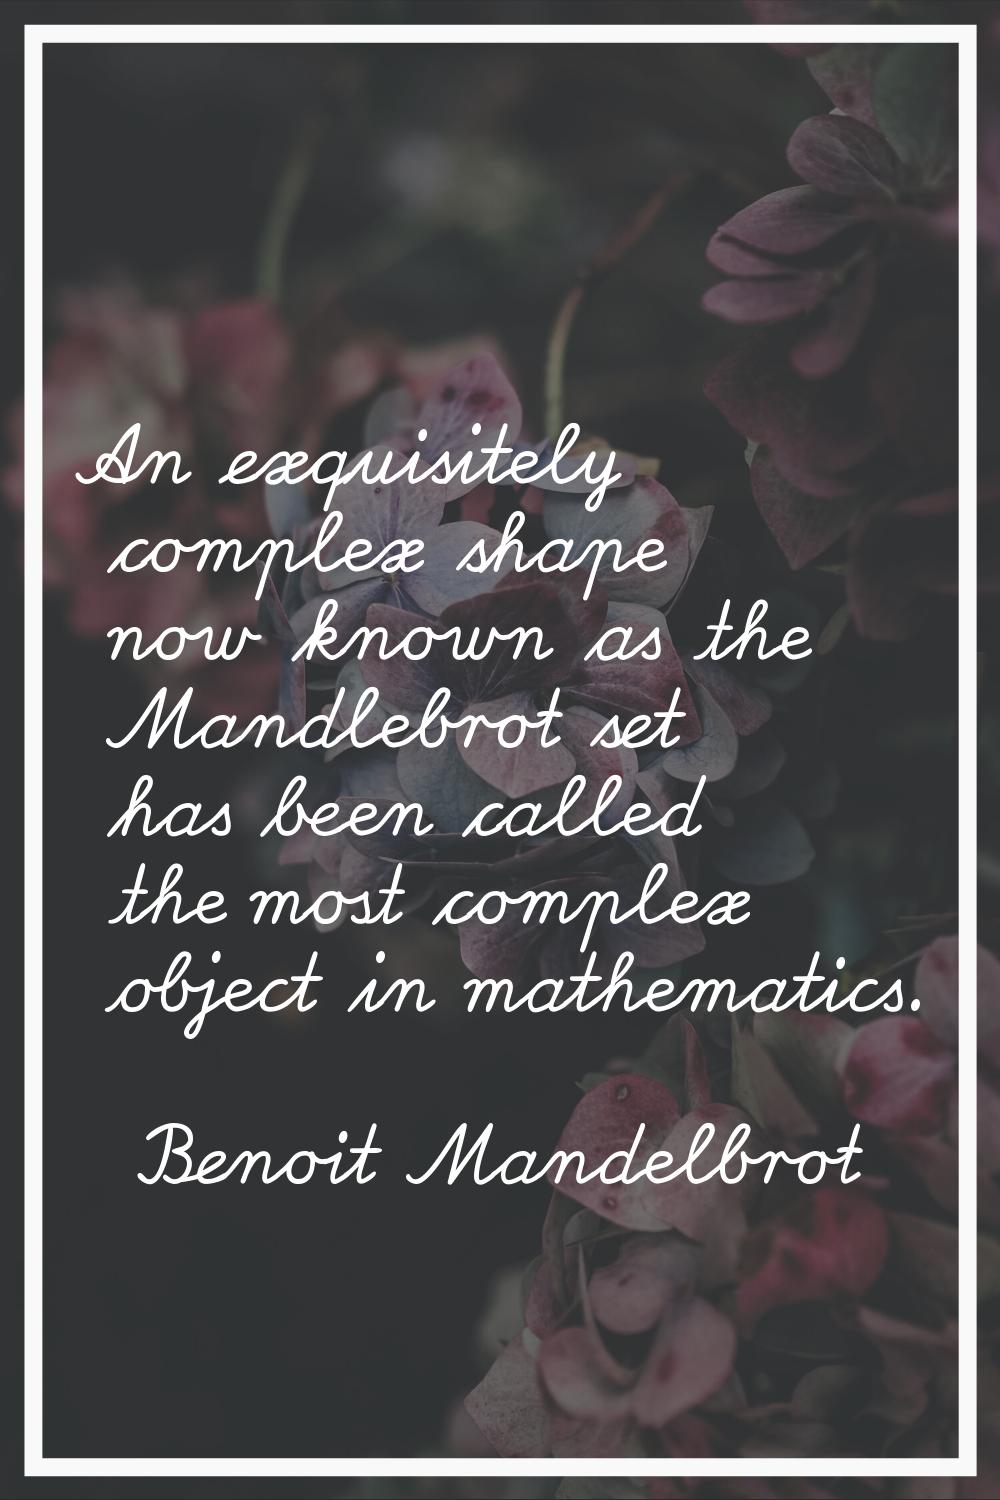 An exquisitely complex shape now known as the Mandlebrot set has been called the most complex objec